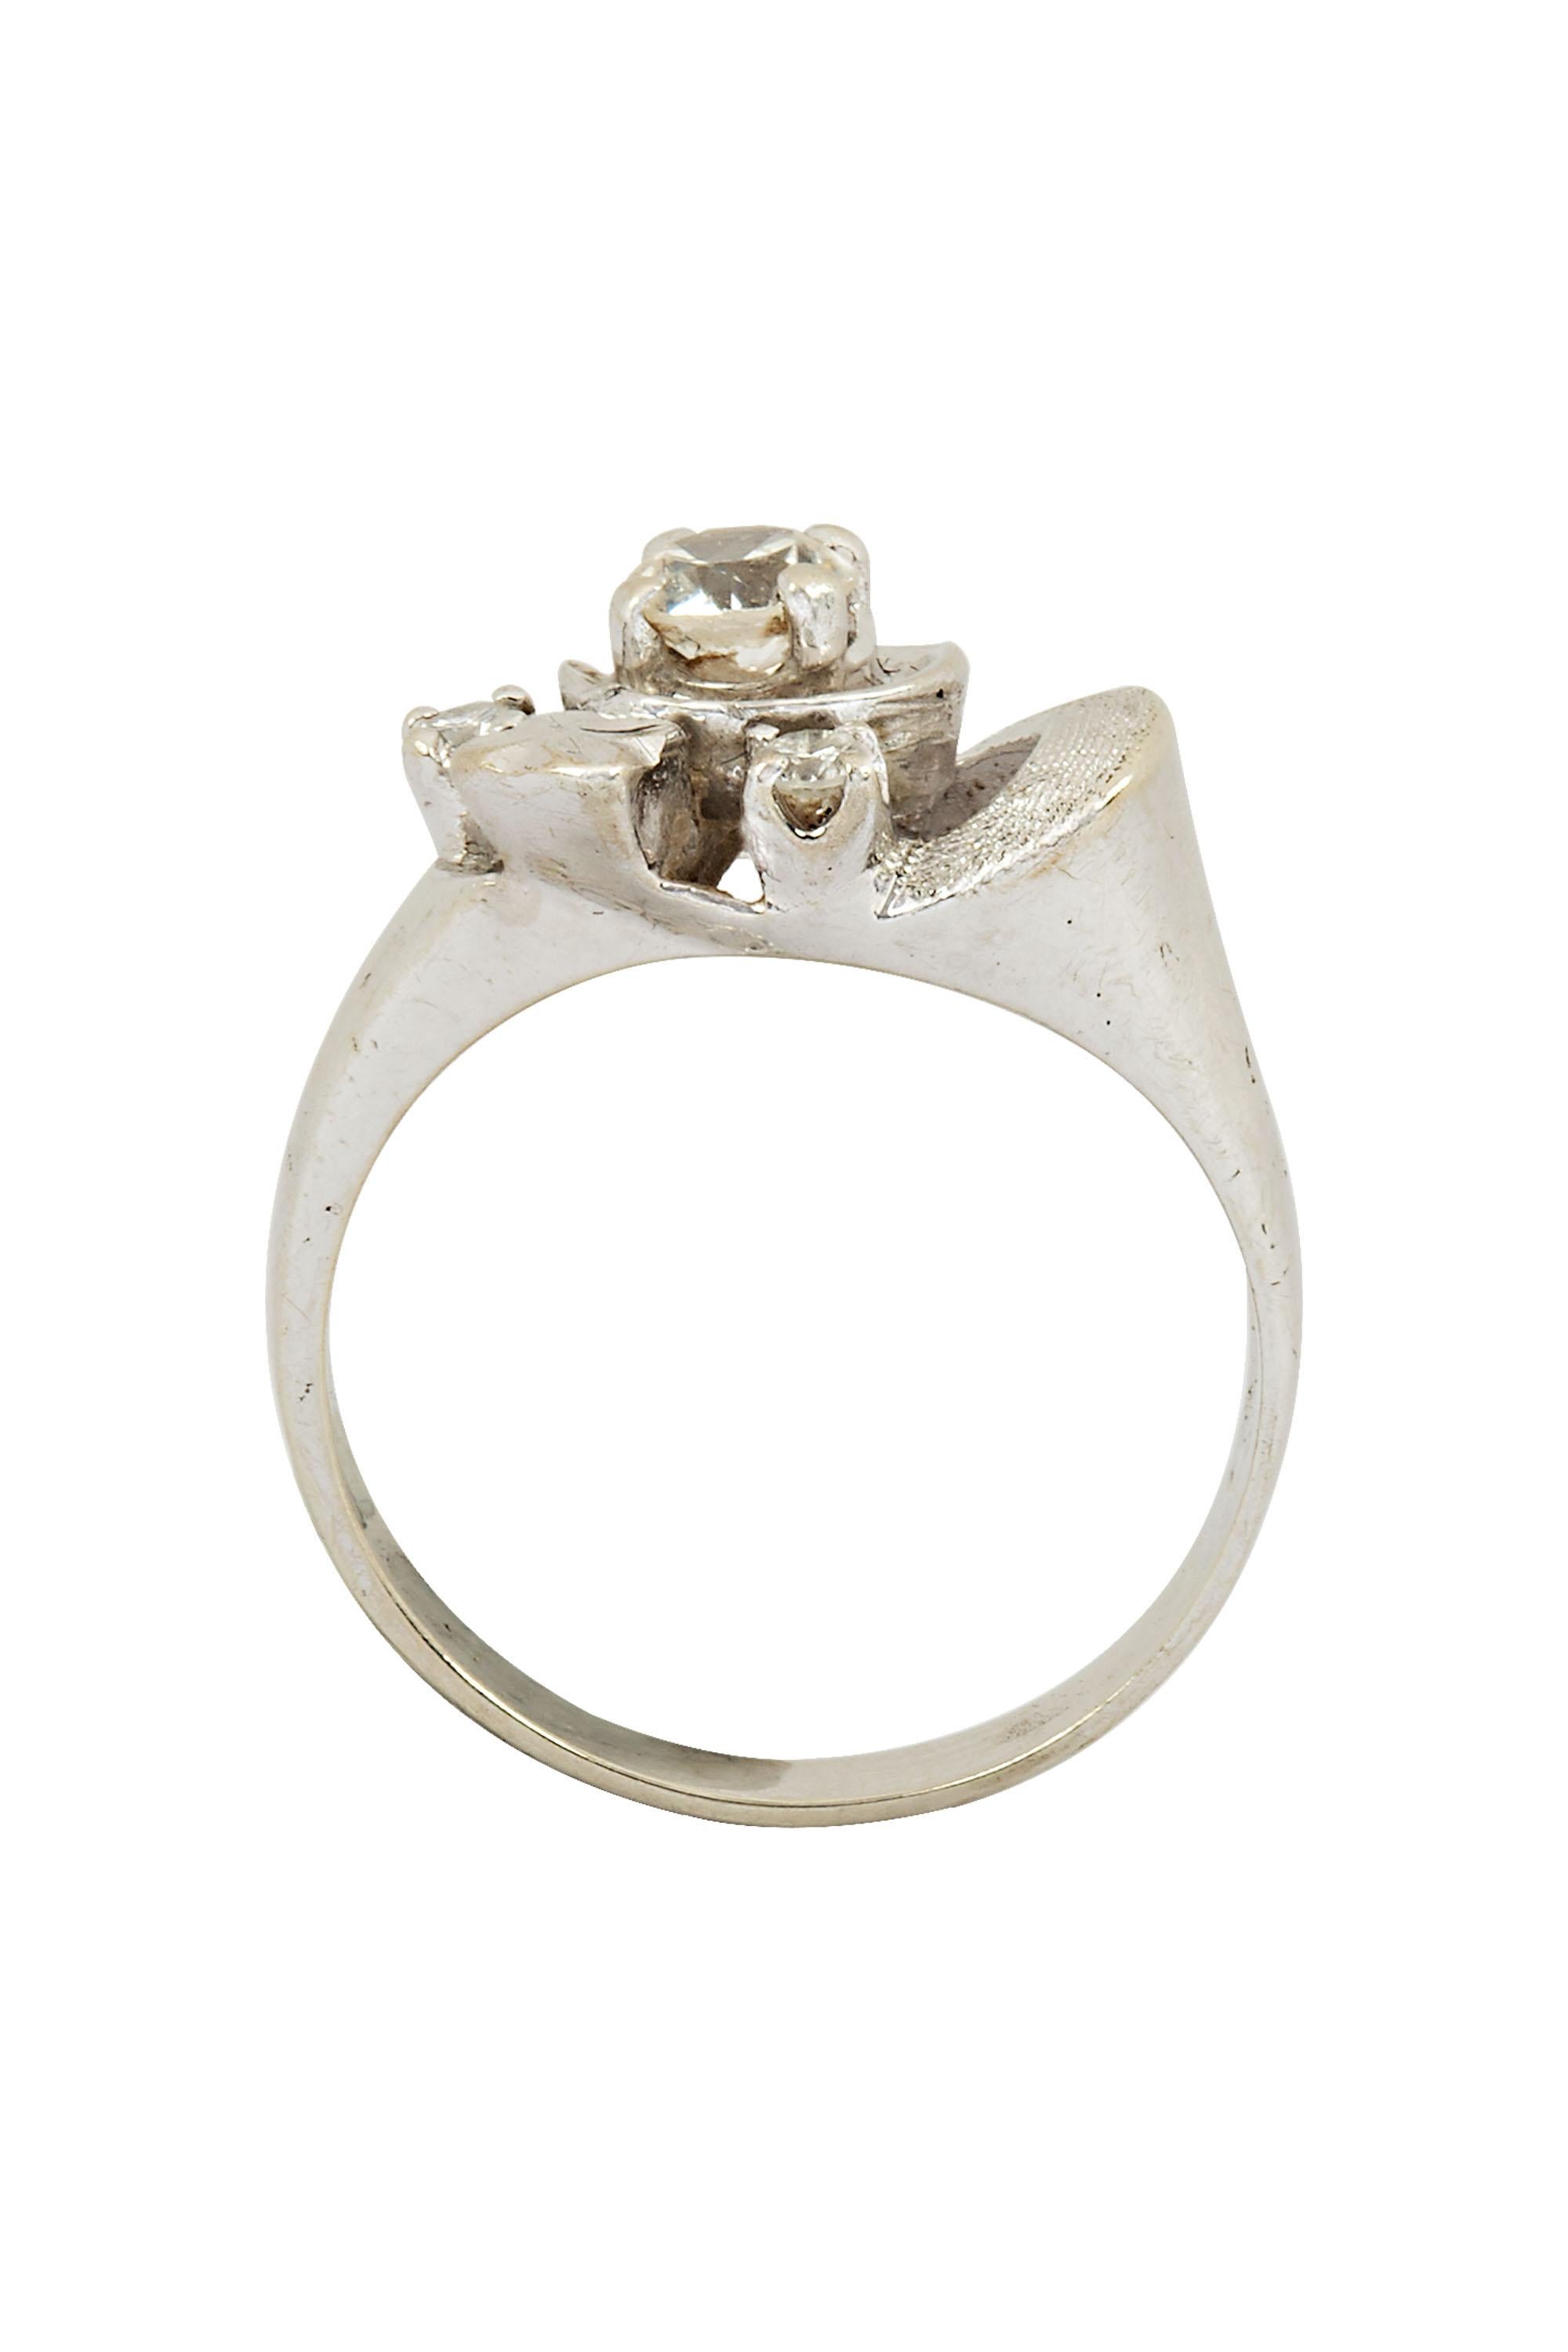 Whether you're dressing up or dressing down, this diamond ring is sure to add a touch of glamour to your look. Vintage 14K white gold diamond ring centered by an estimated 0.25 carat diamond and accented by two round stones, adding extra brilliance